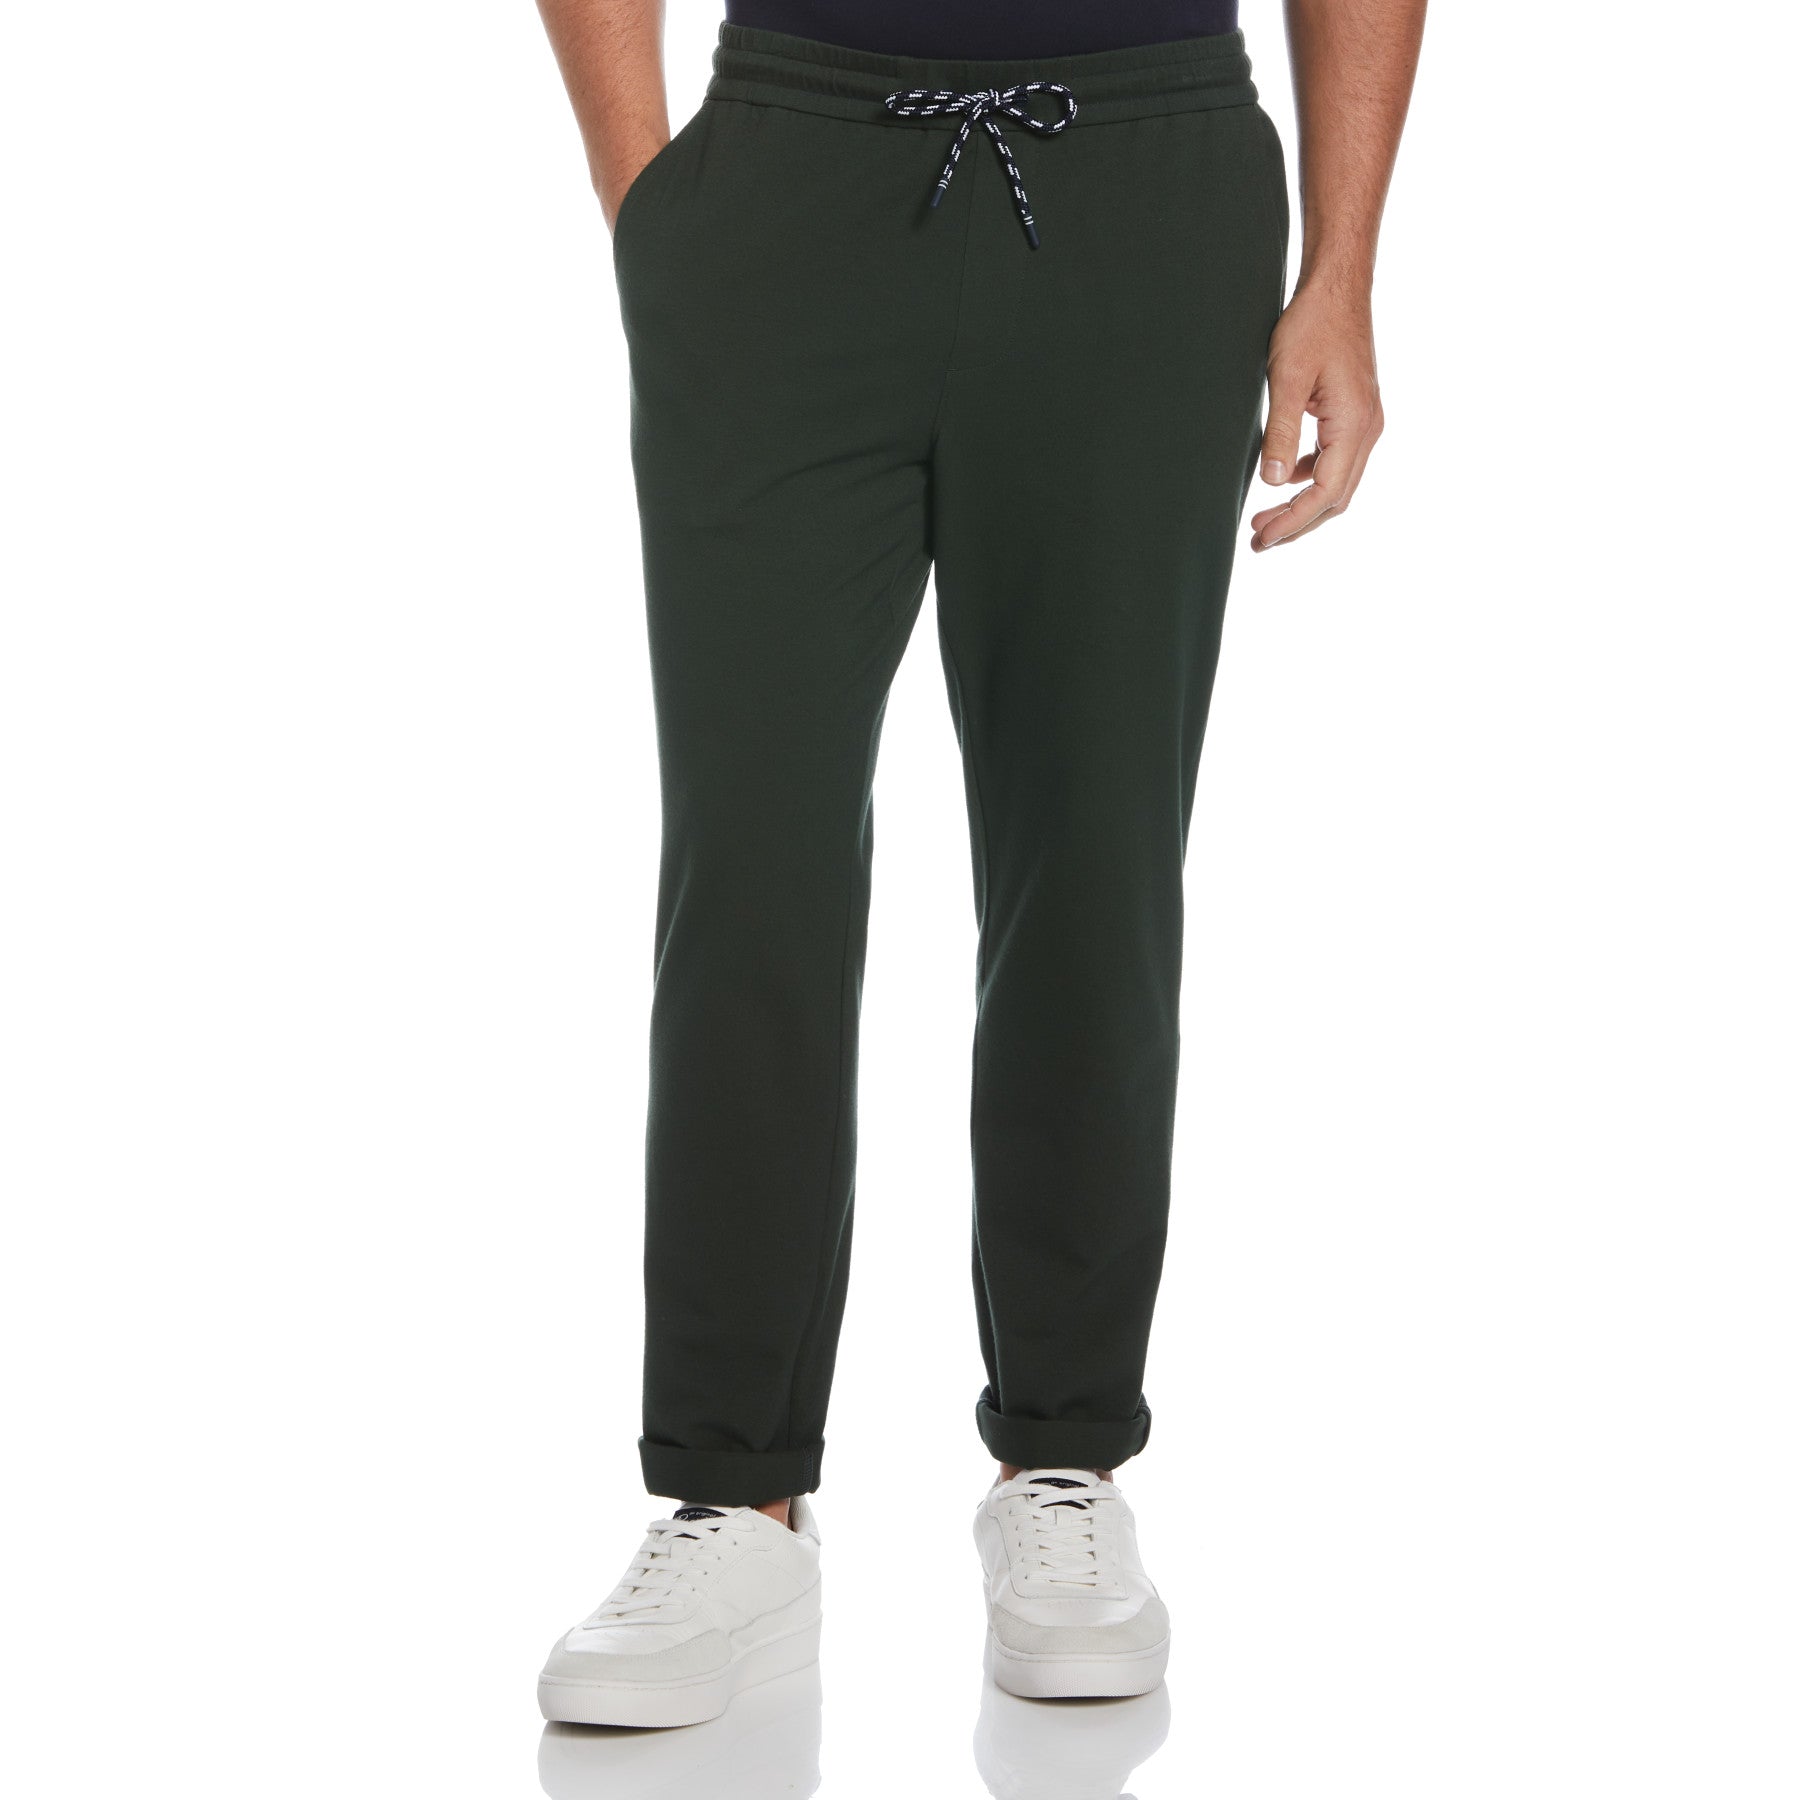 View Jersey Pull On Drawstring Sweatpant In Deep Forest information